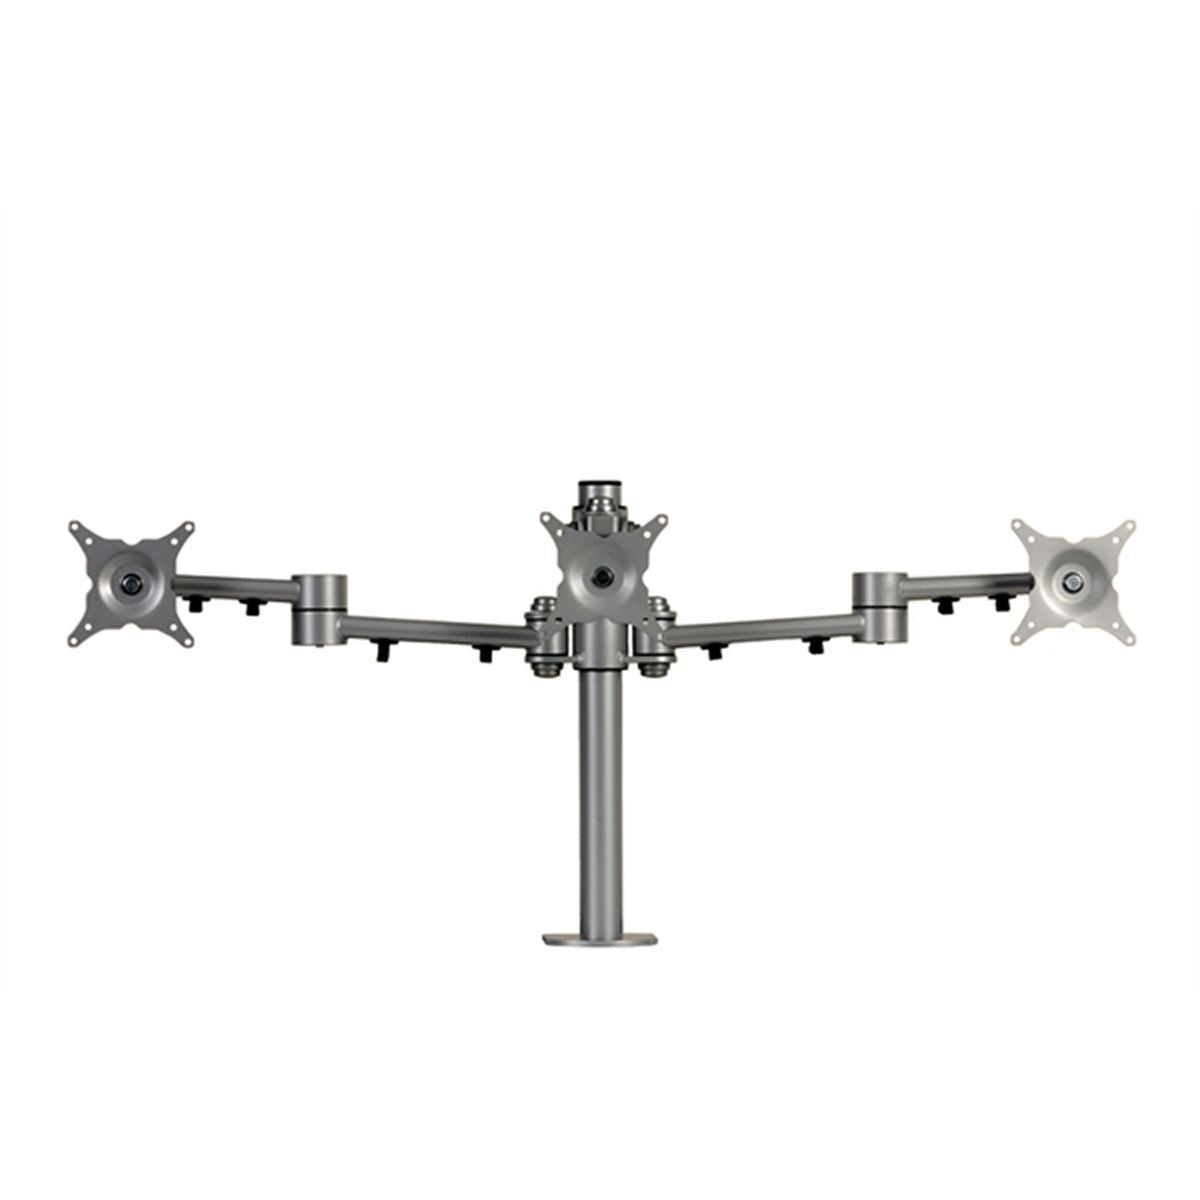 Vision Desk Mounted Pole Monitor Arm